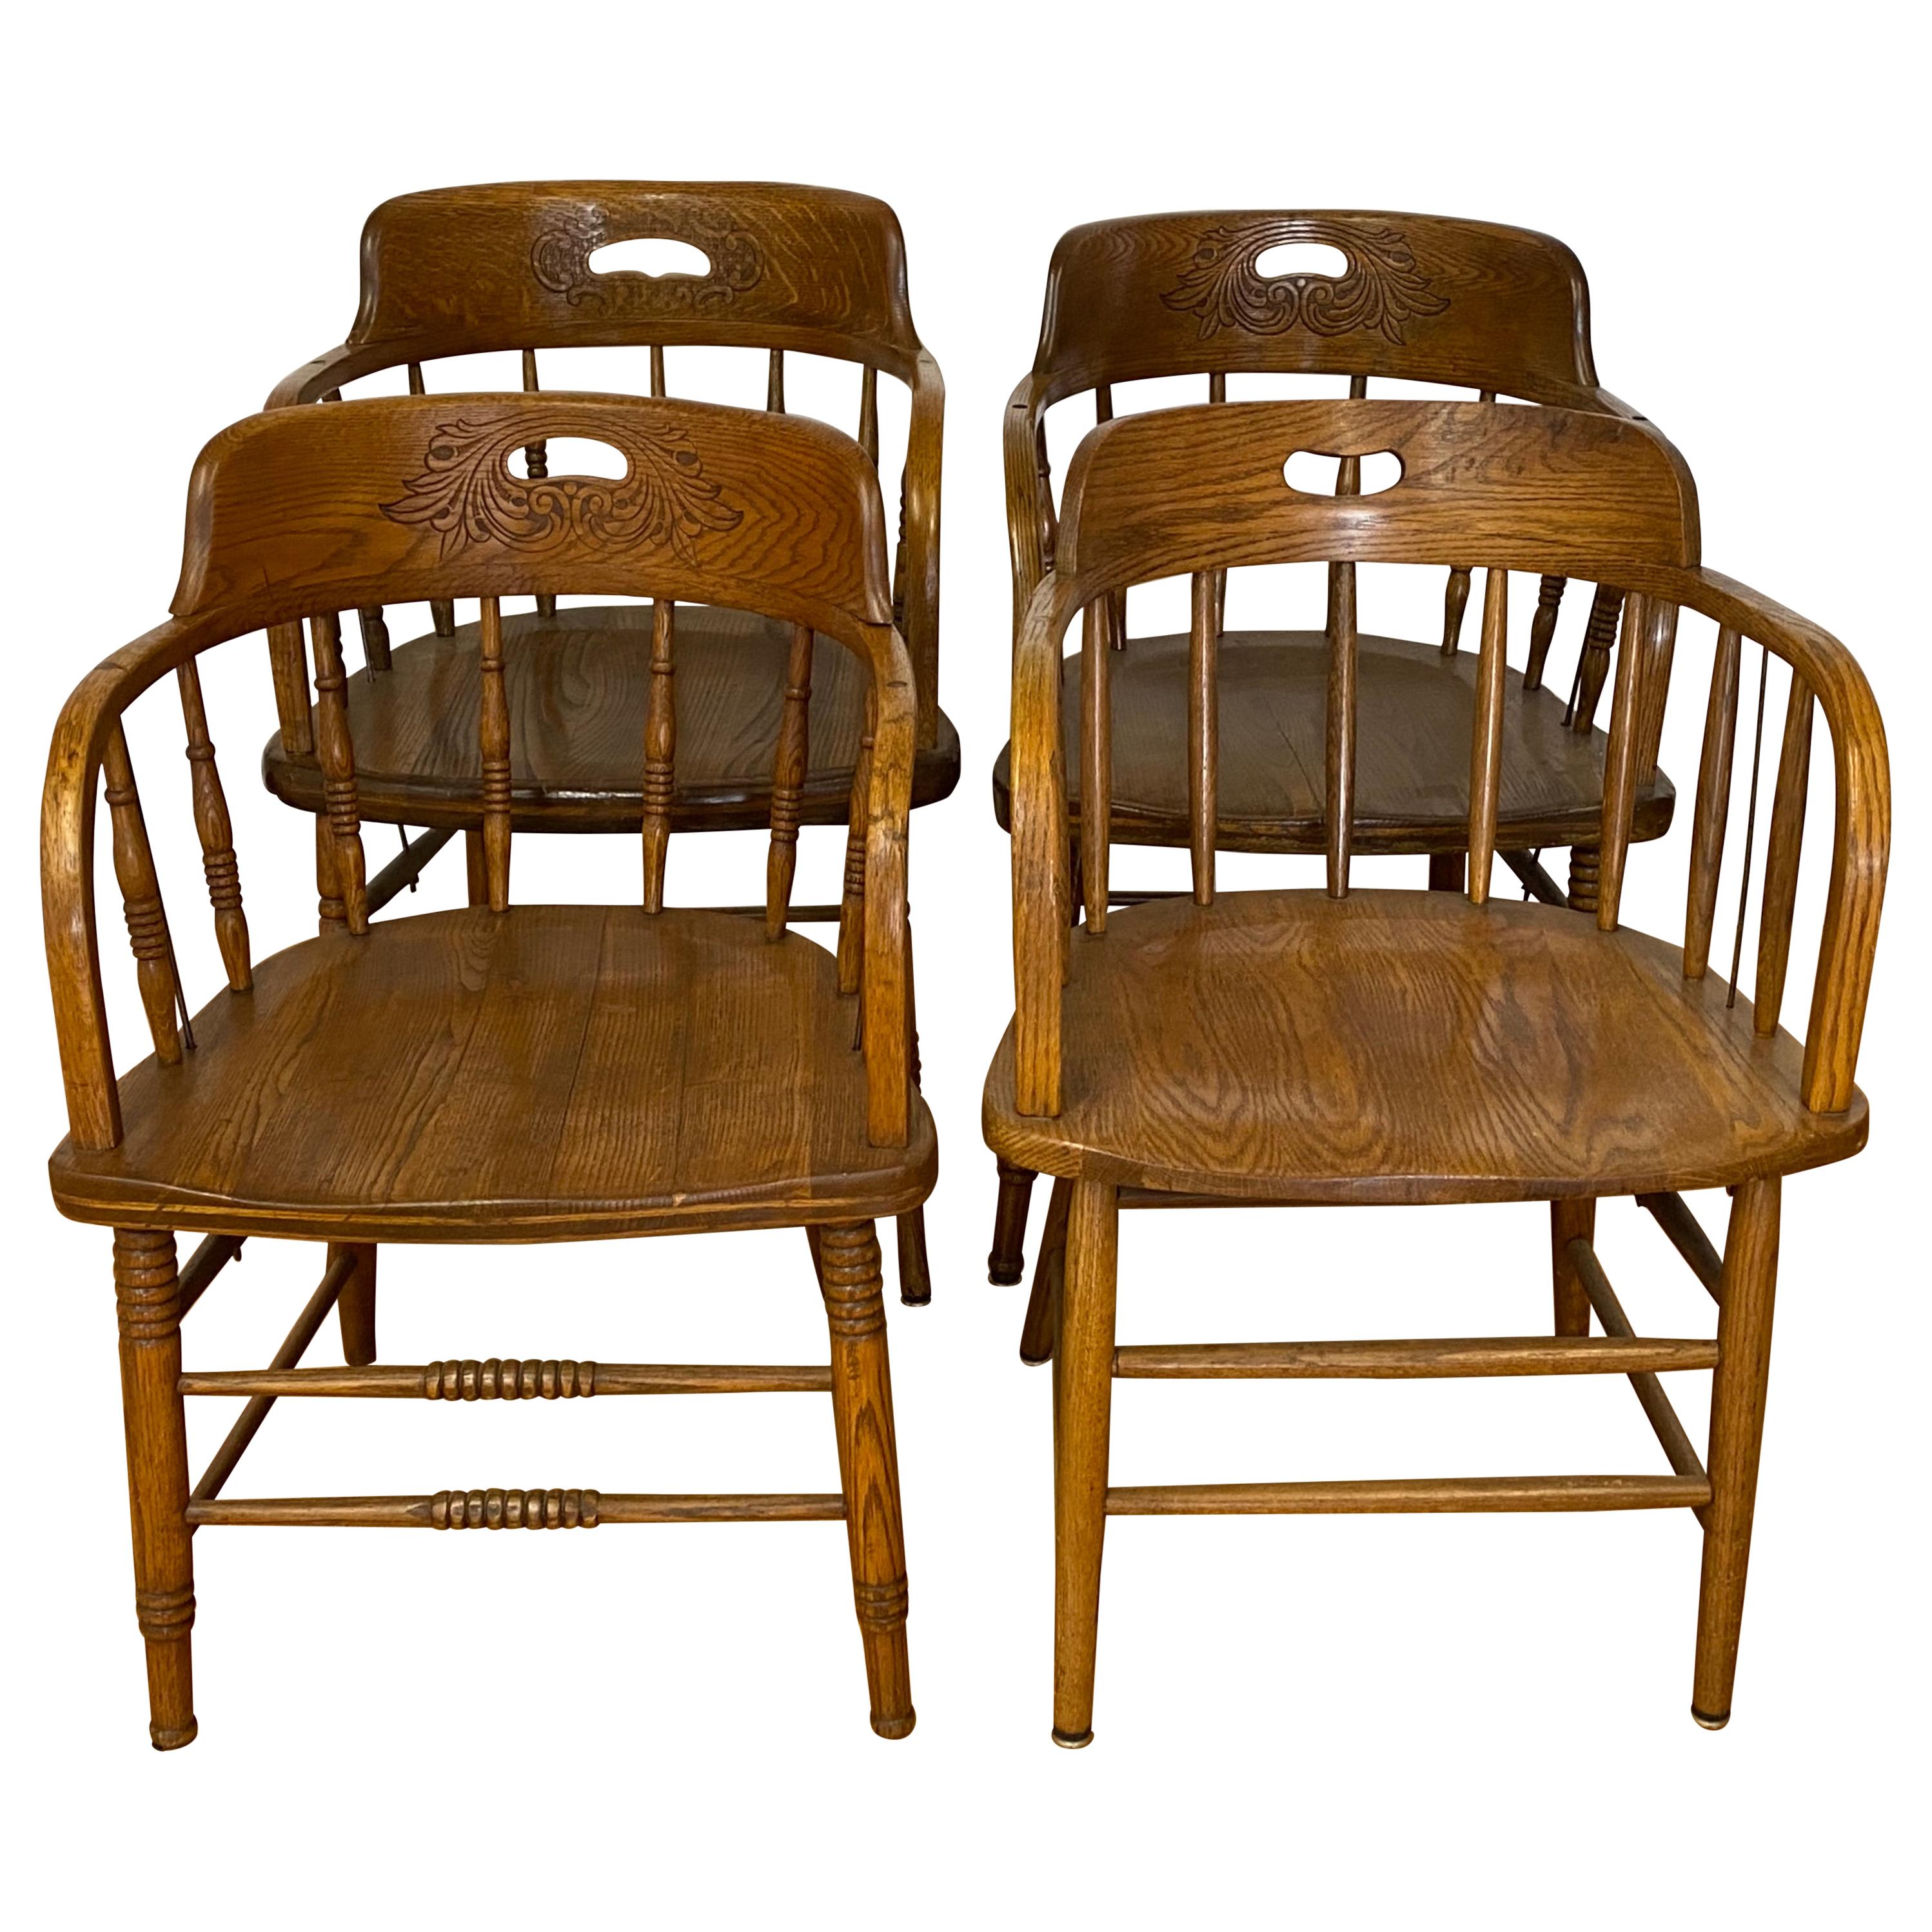 Set of Four Early 20th Century Mismatched Barrel Back Oak Pub Chairs